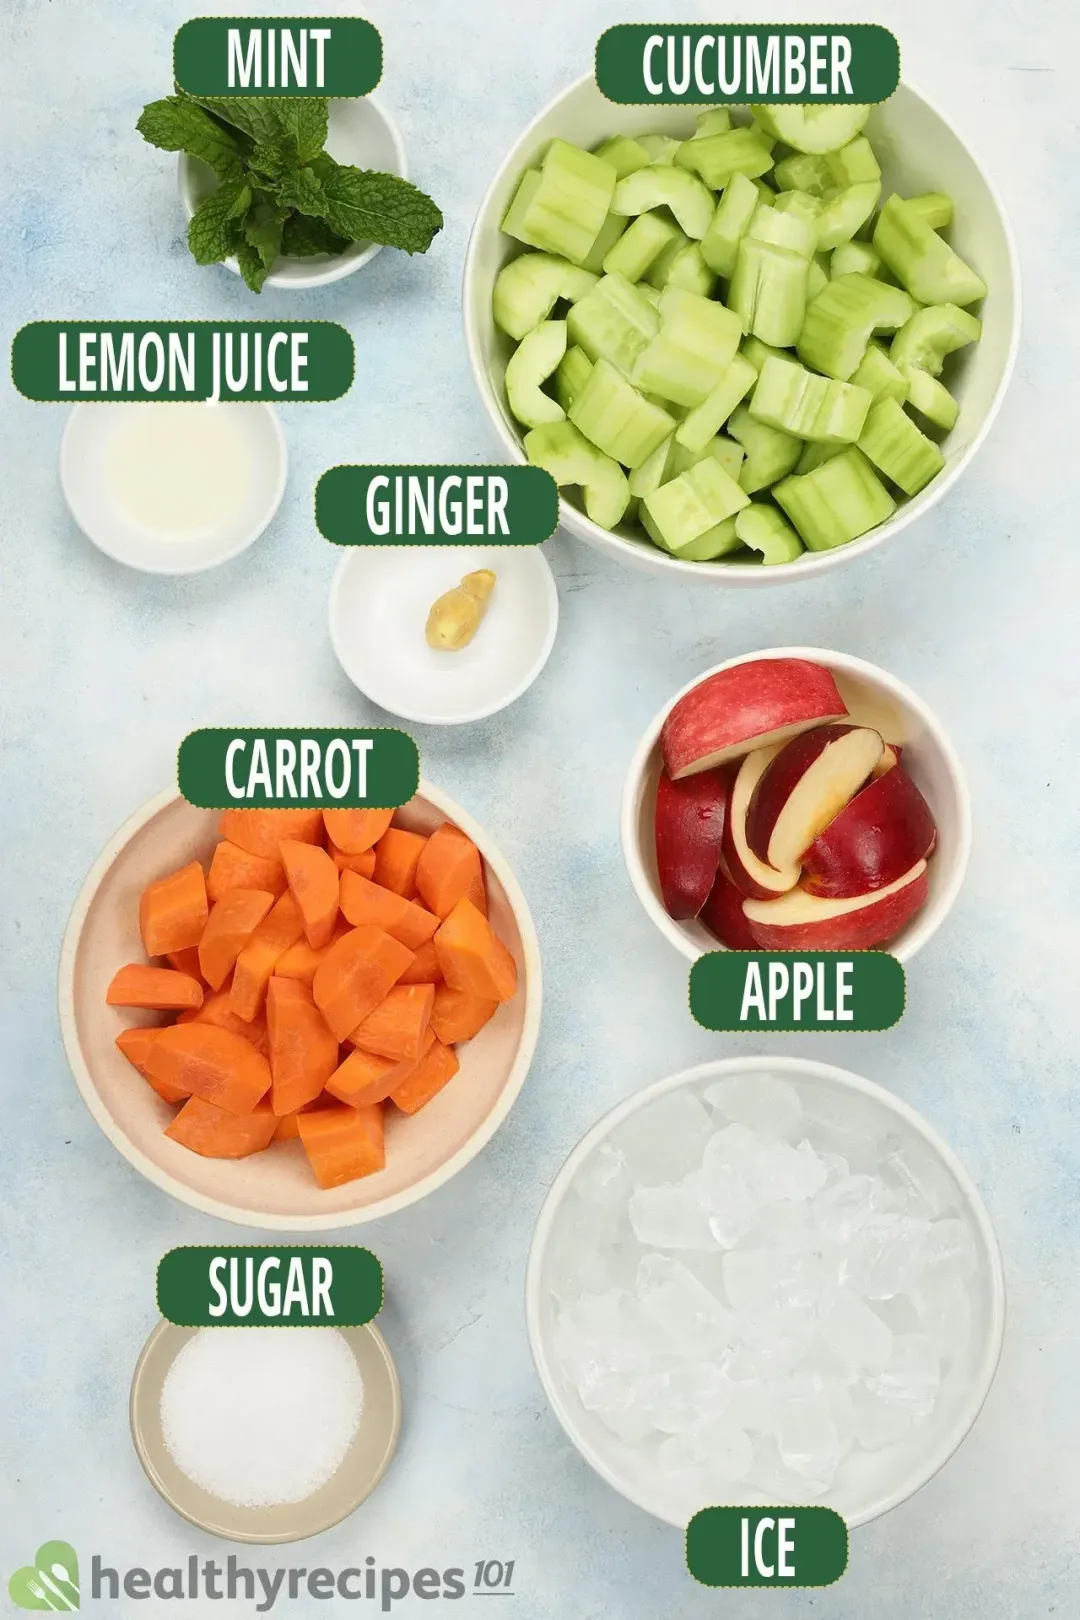 Ingredients in separate bowls: peeled and chunked cucumbers, apple quarters, mints, sugar, chunked carrots, ice nuggets, lemon juice